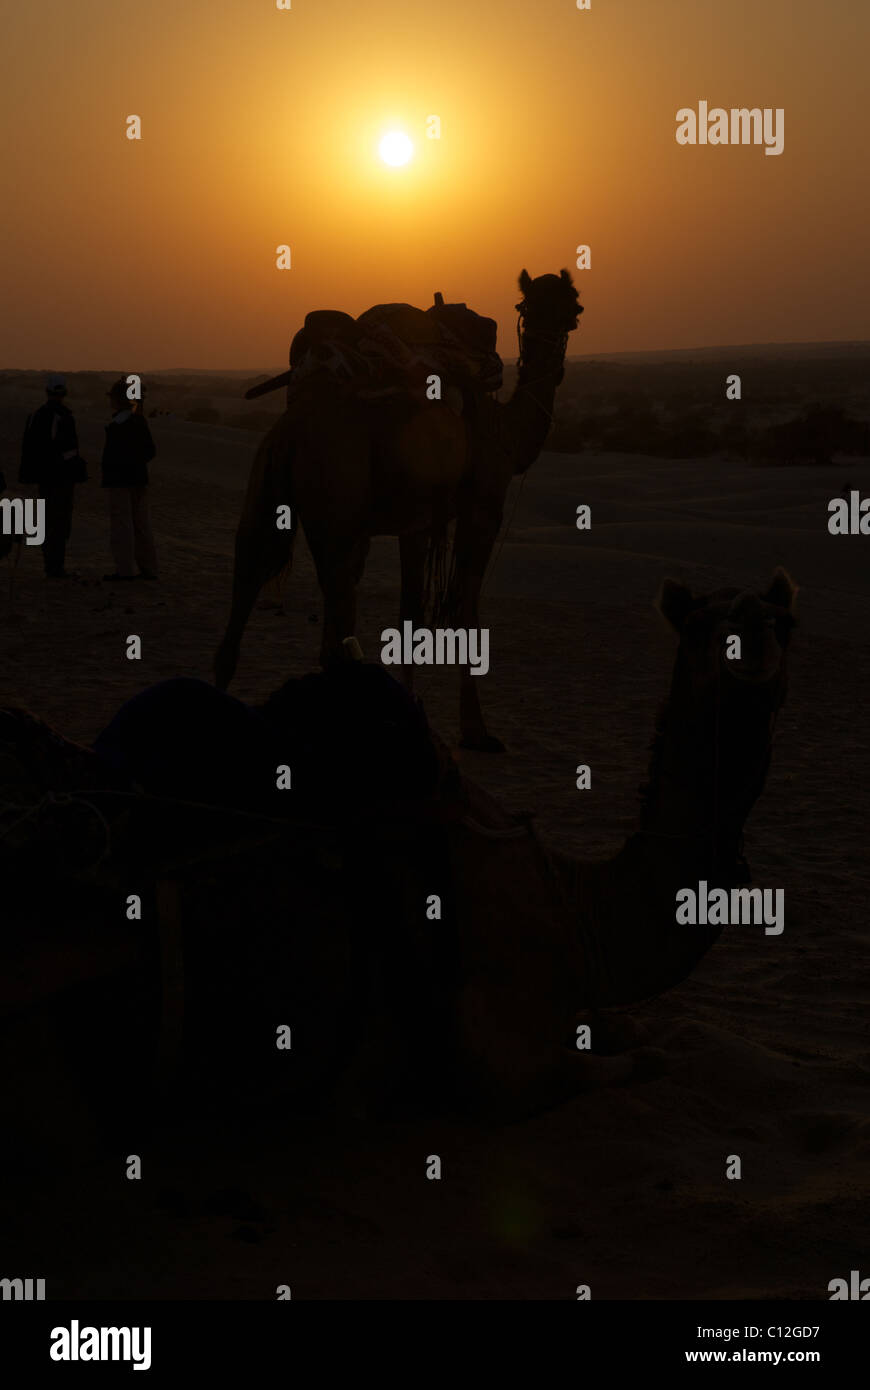 Silhouette of one Camel at sunset in the Rajasthani desert Stock Photo